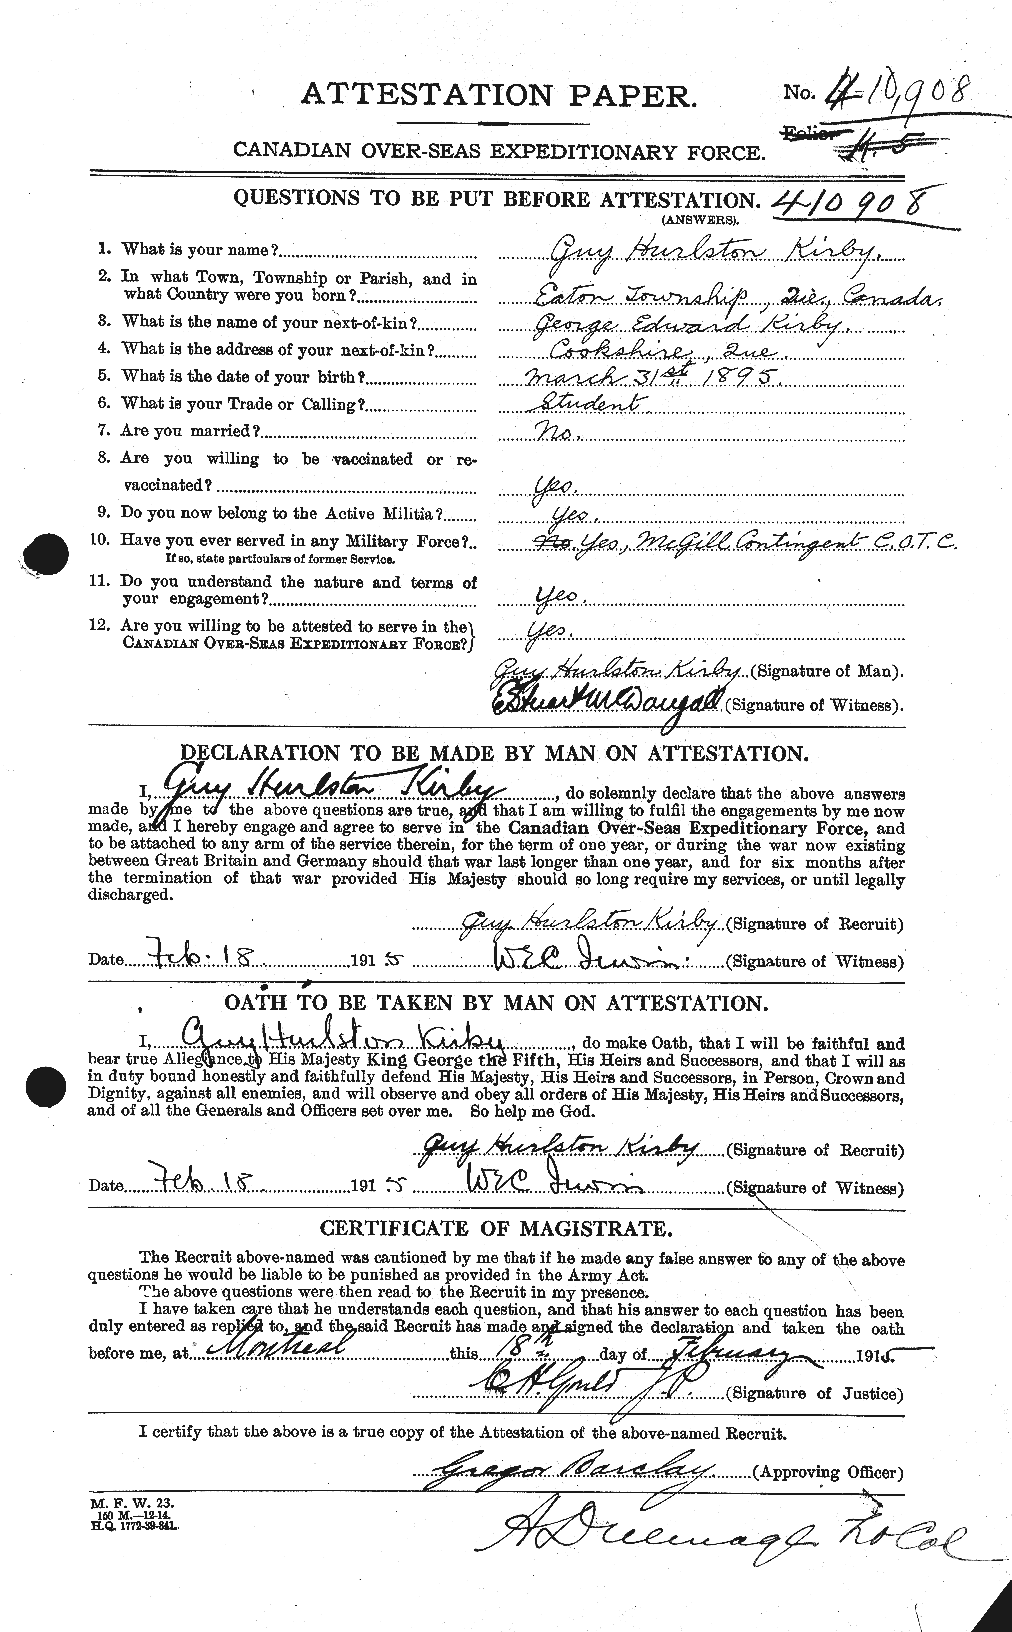 Personnel Records of the First World War - CEF 437203a